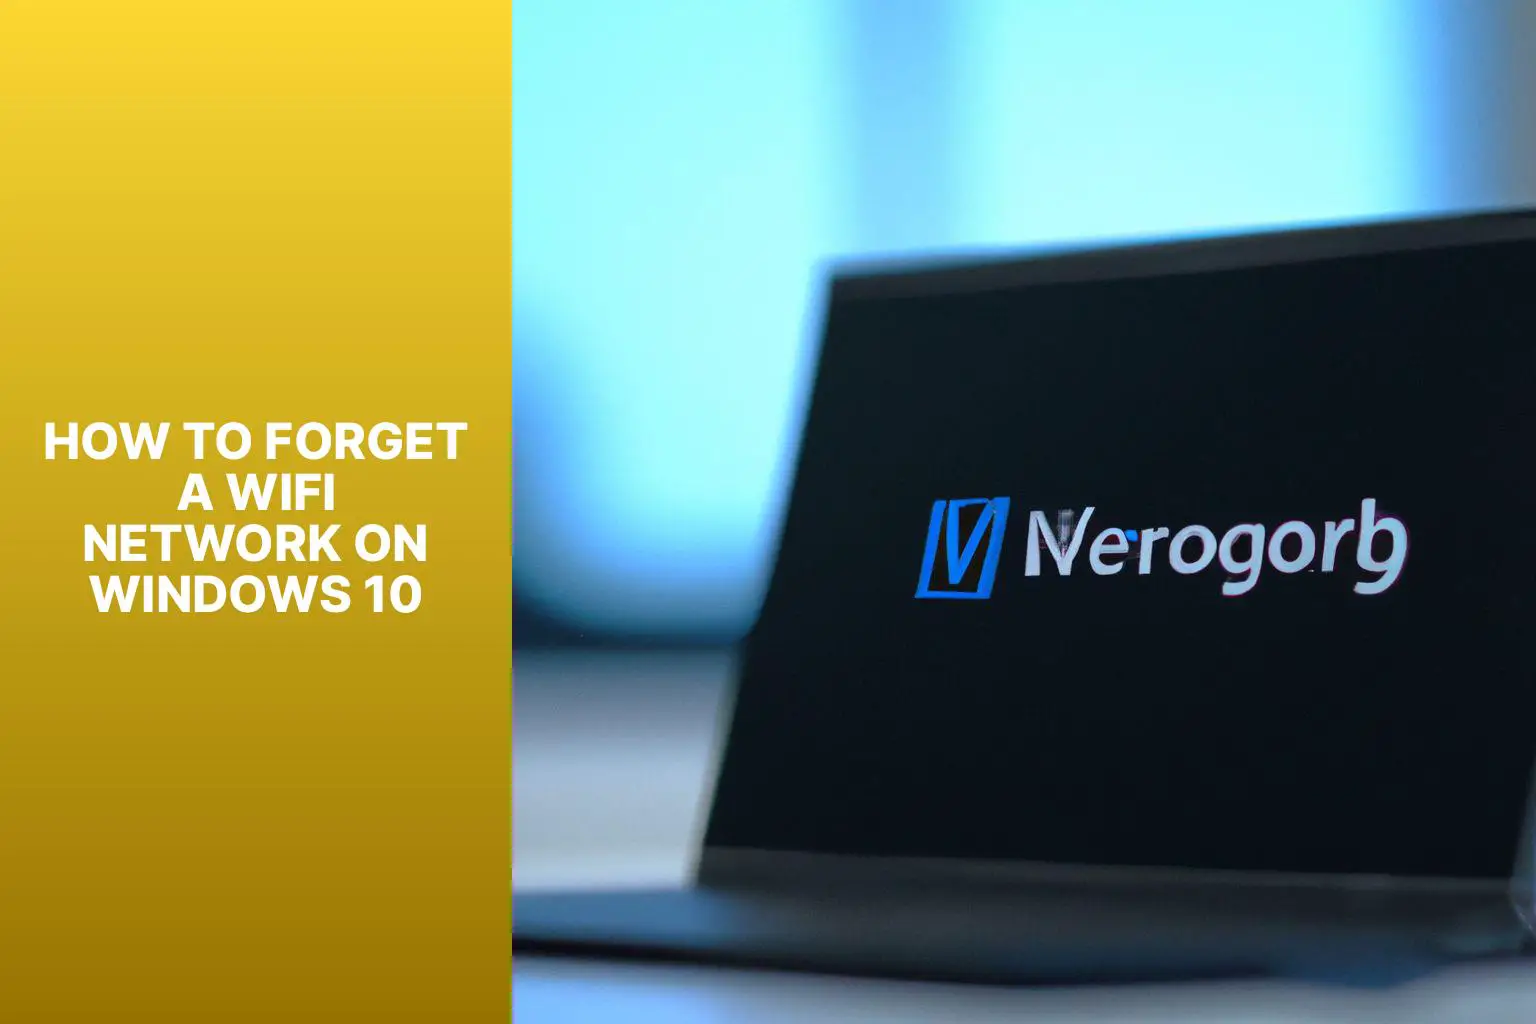 Forget a Network on Windows how to forget a wifi network on windows 10dkep